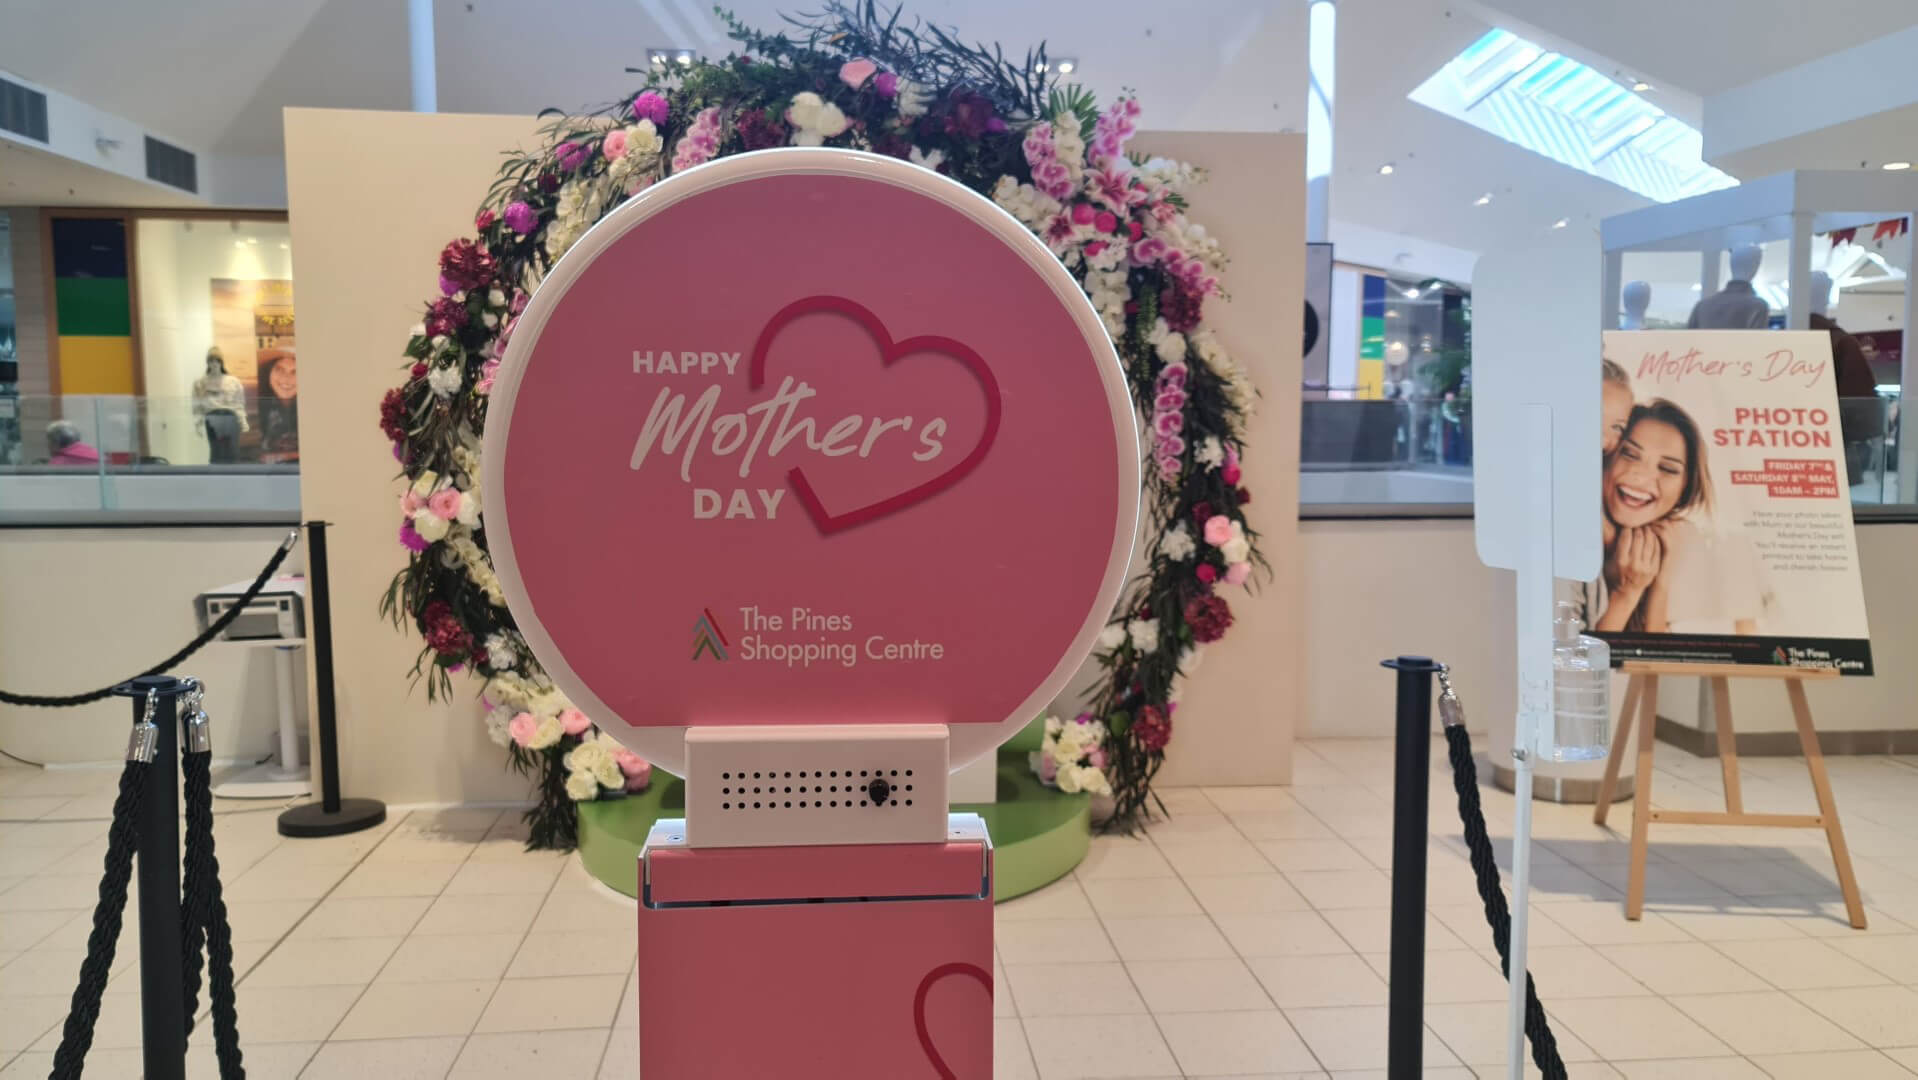 close up of a pink photo station set up to take pictures for mothers day at a shopping centre